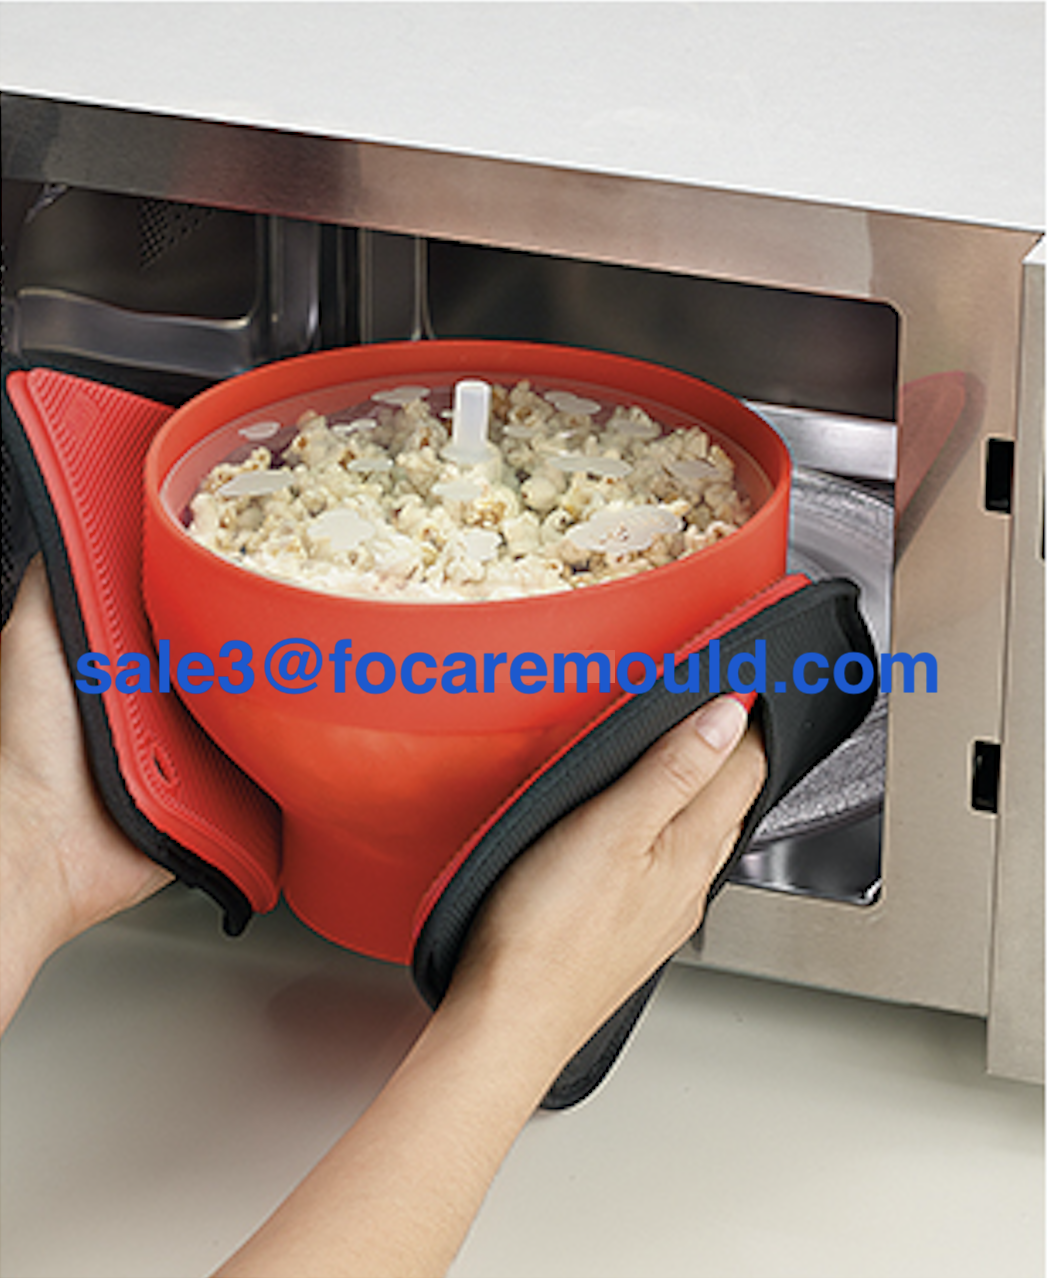 High quality Two-color popcorn bowl Quotes,China Two-color popcorn bowl Factory,Two-color popcorn bowl Purchasing